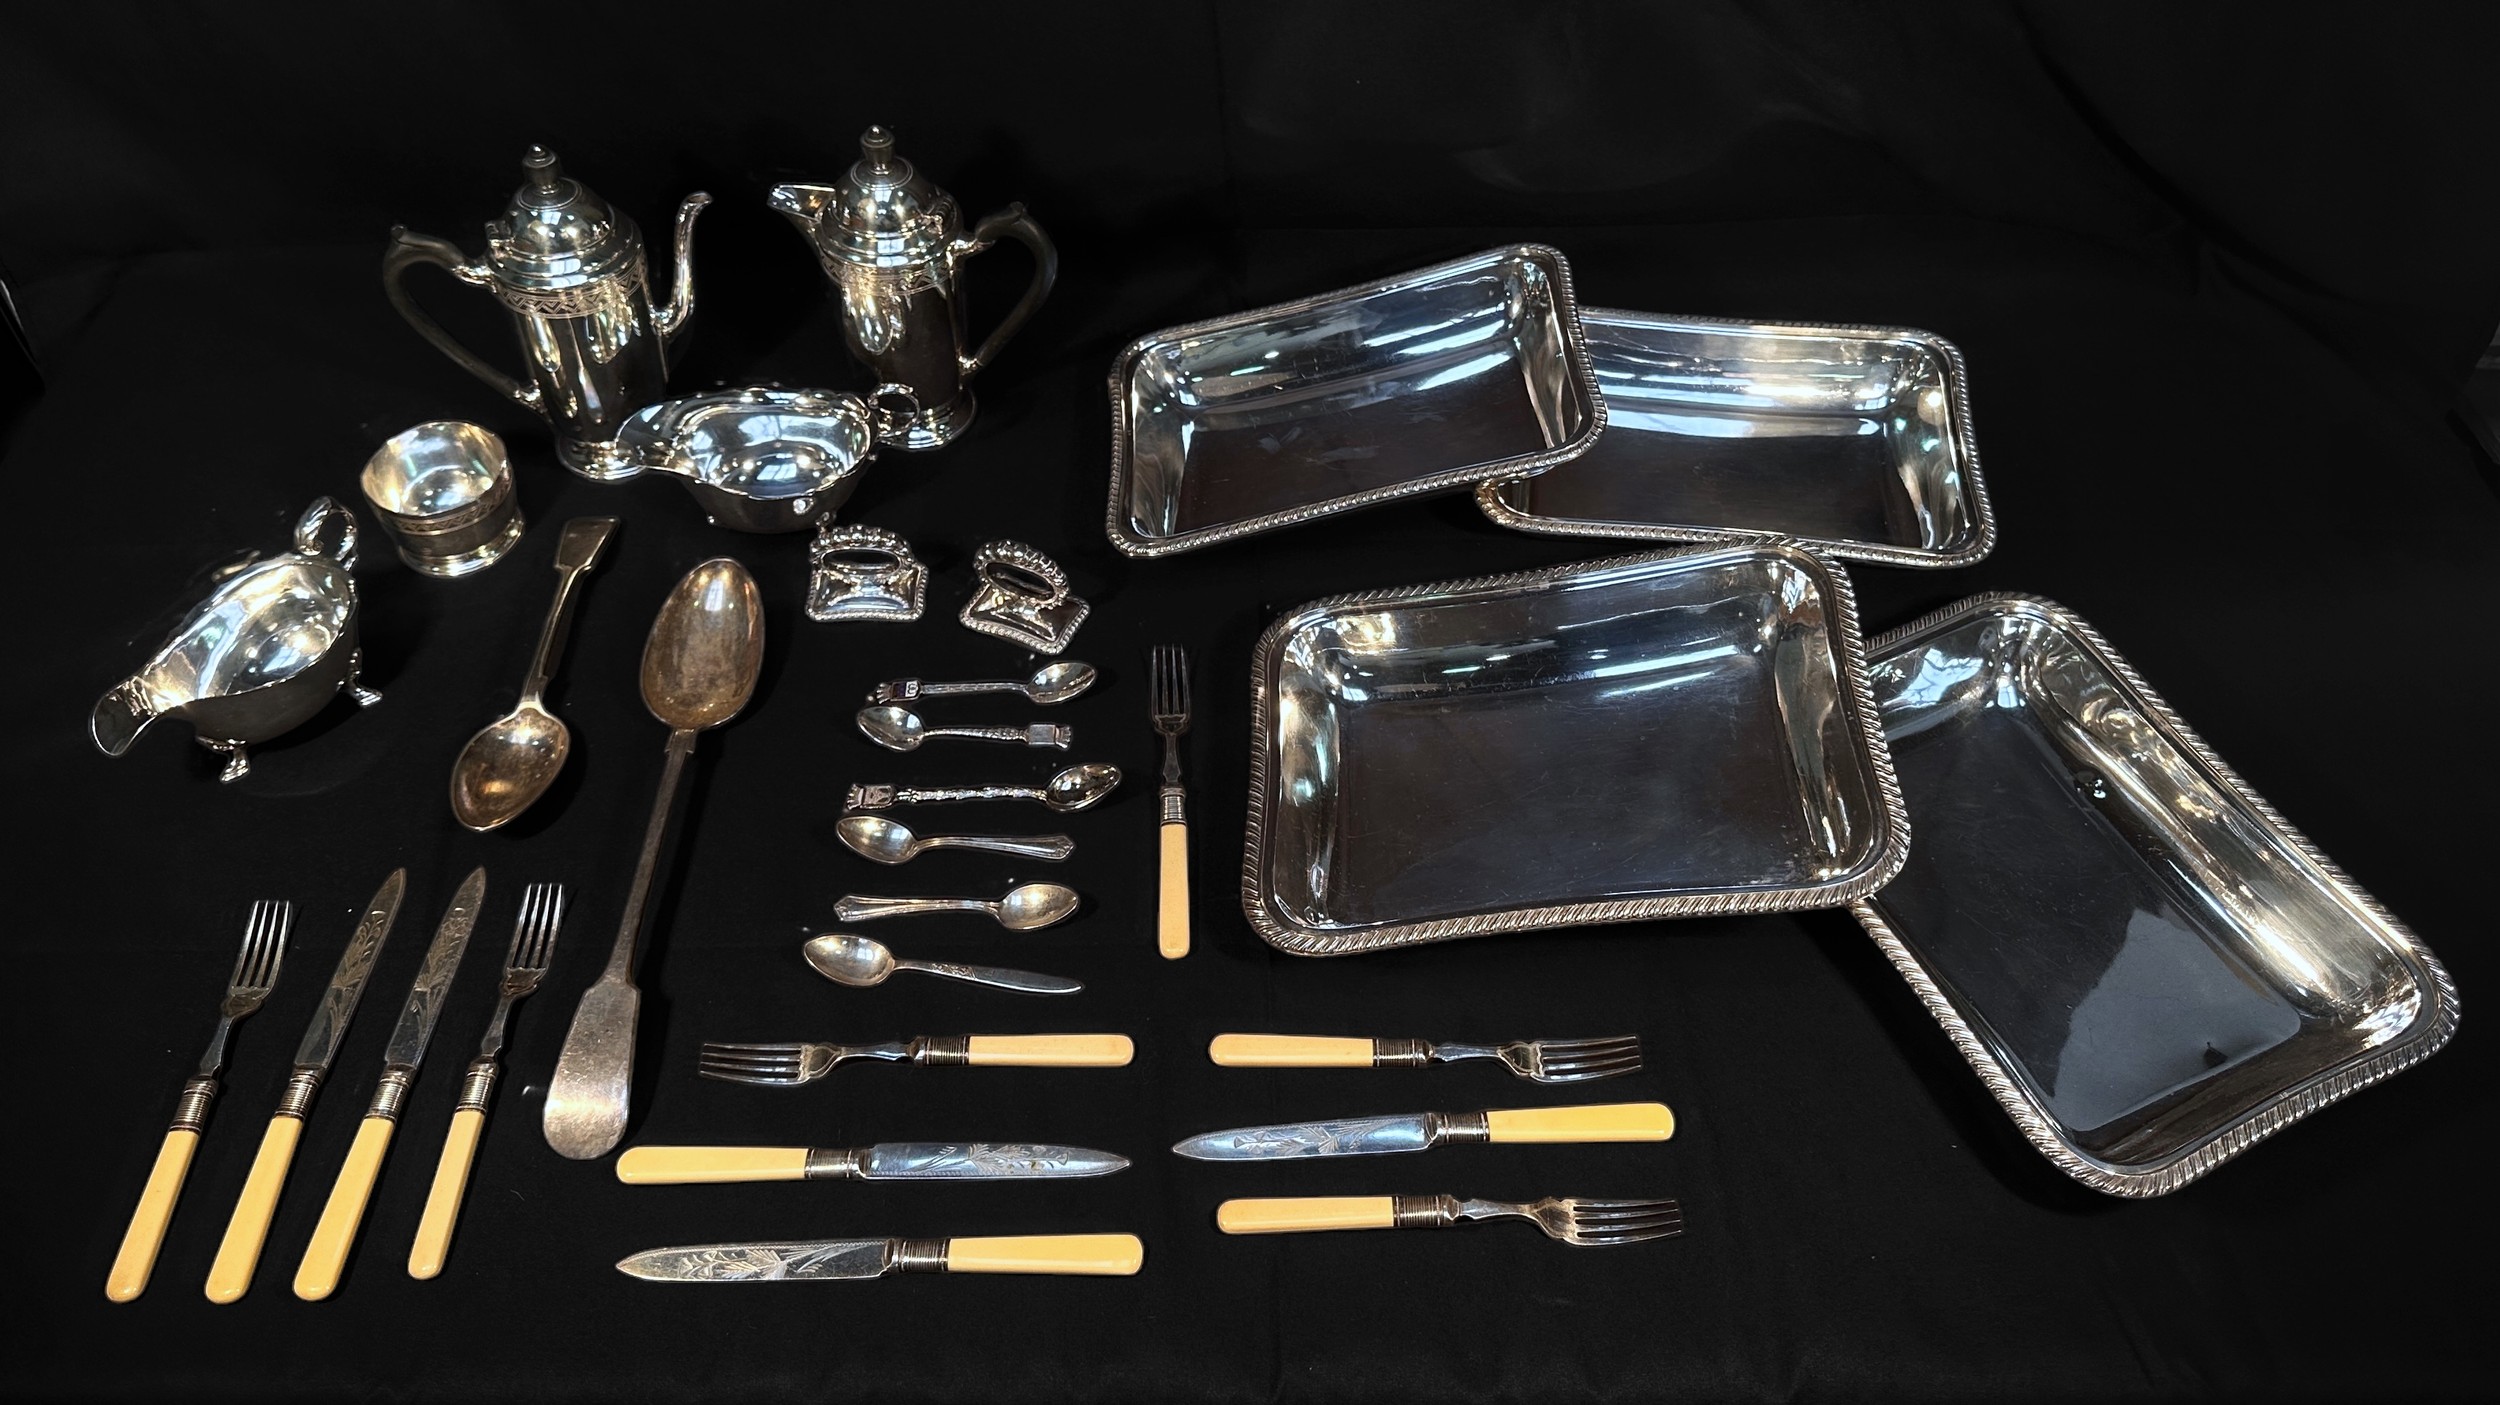 A Viners 44-piece canteen of silver-plated ‘Harley Elegance’ pattern cutlery, serves six, together